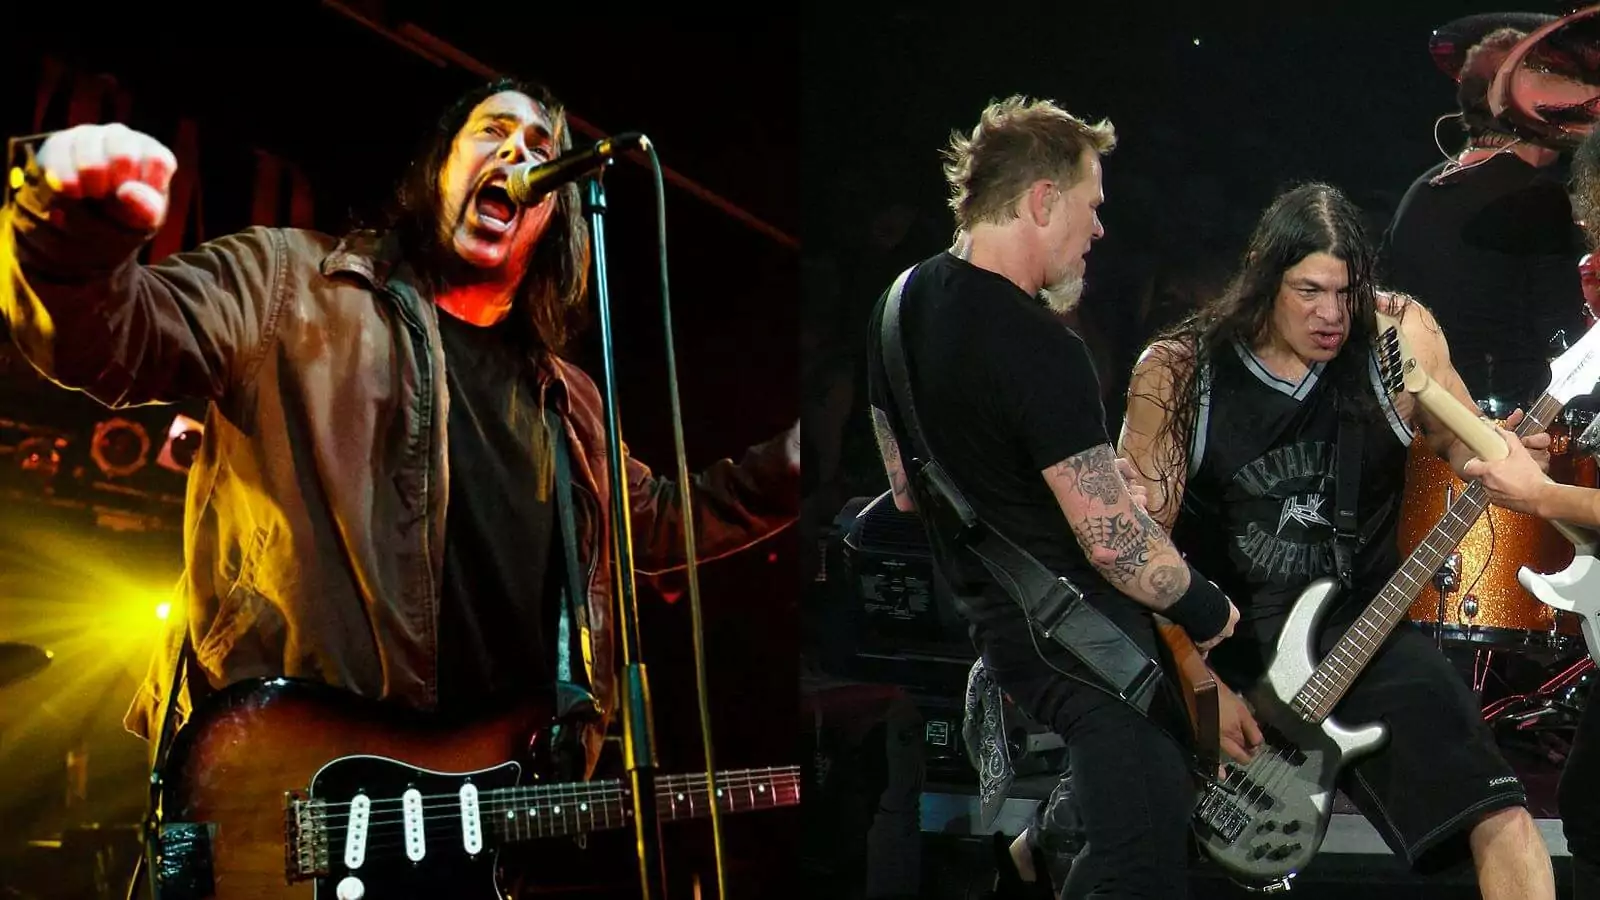 Dave Wyndorf Interview About Metallica: "So many dudes on tour"